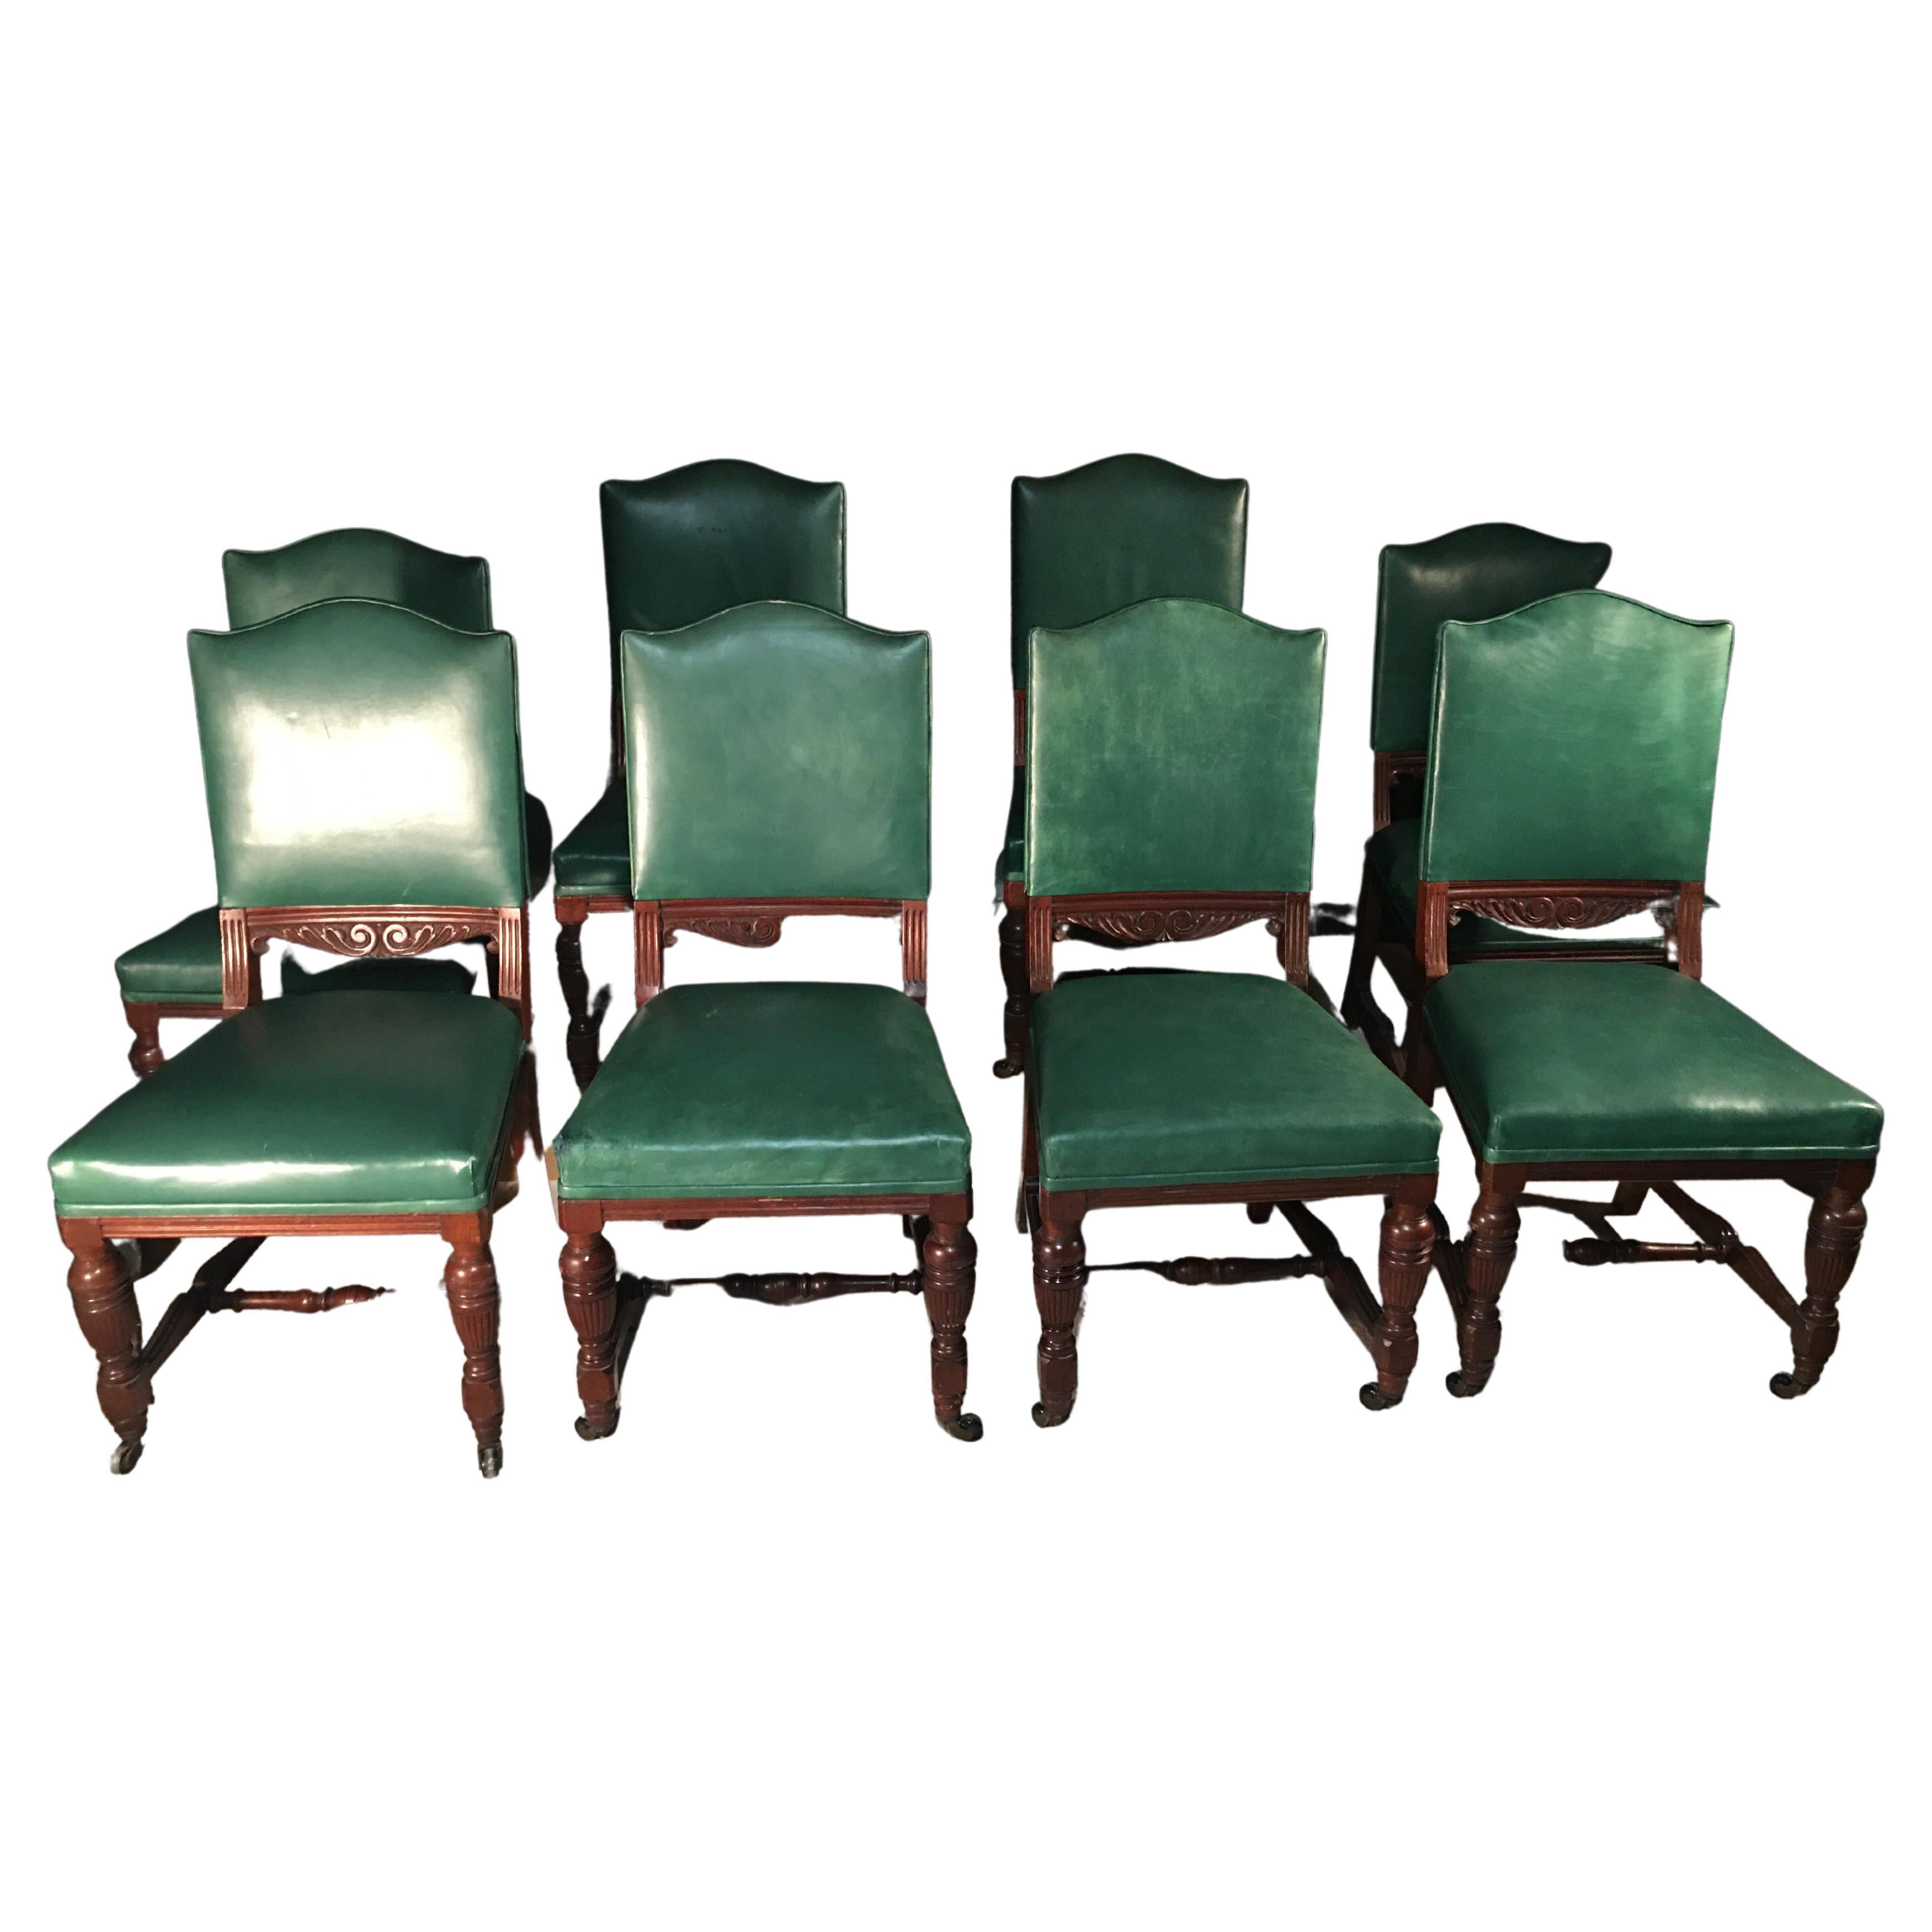 Series of 8 English Chairs in Green Leather, Mahogany, Early 20th Century